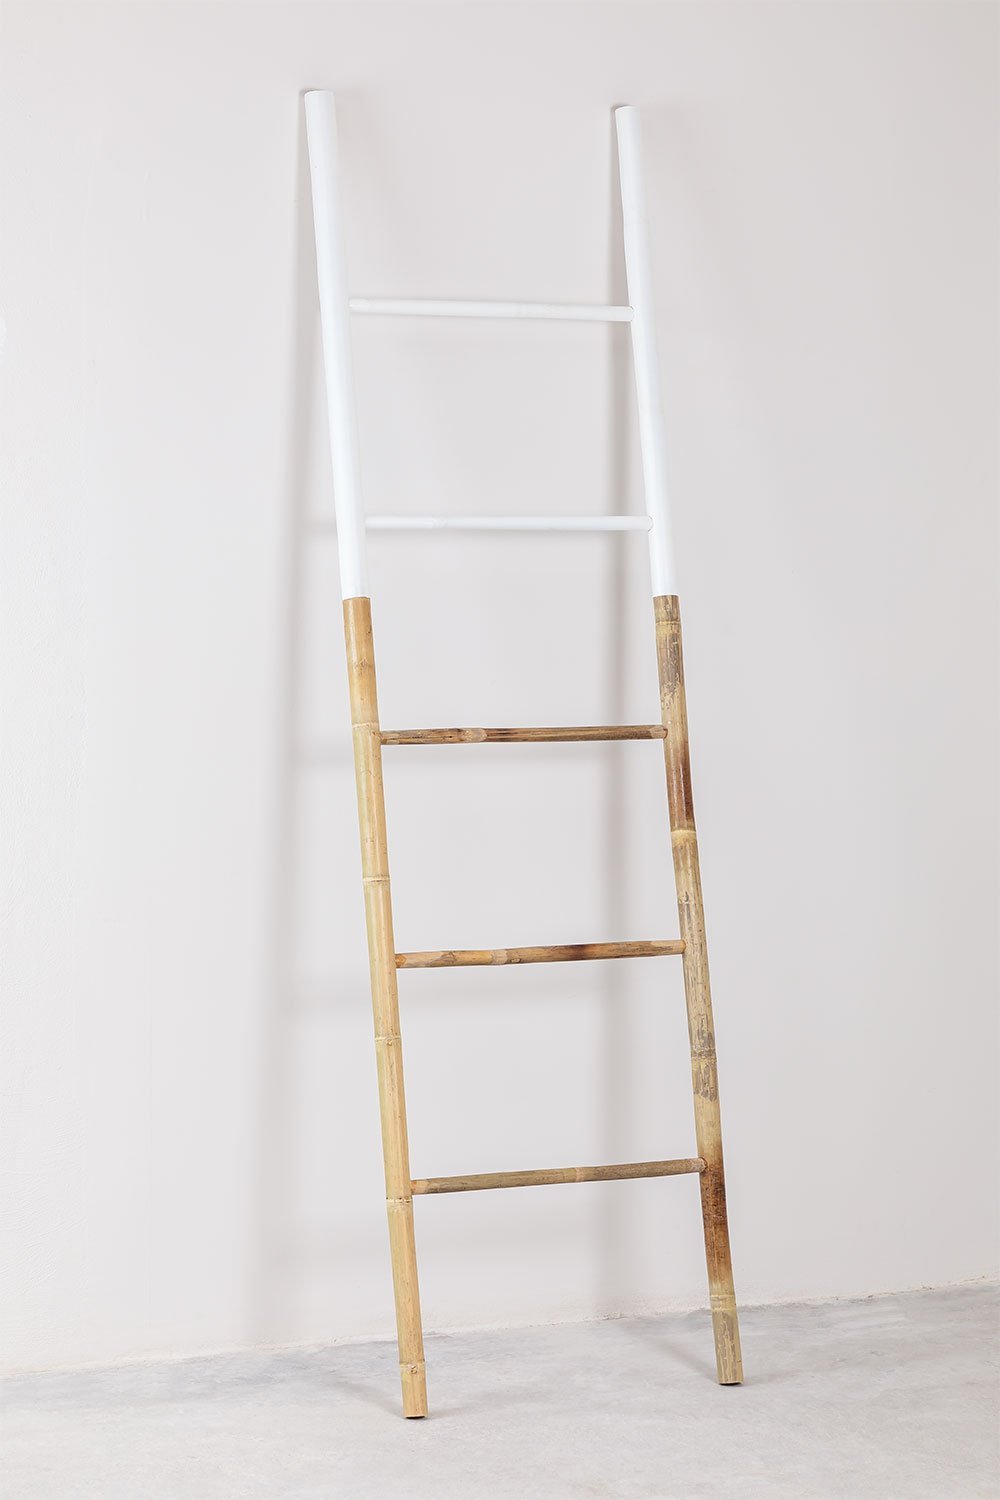 Dipped Ladder LEIT, gallery image 2